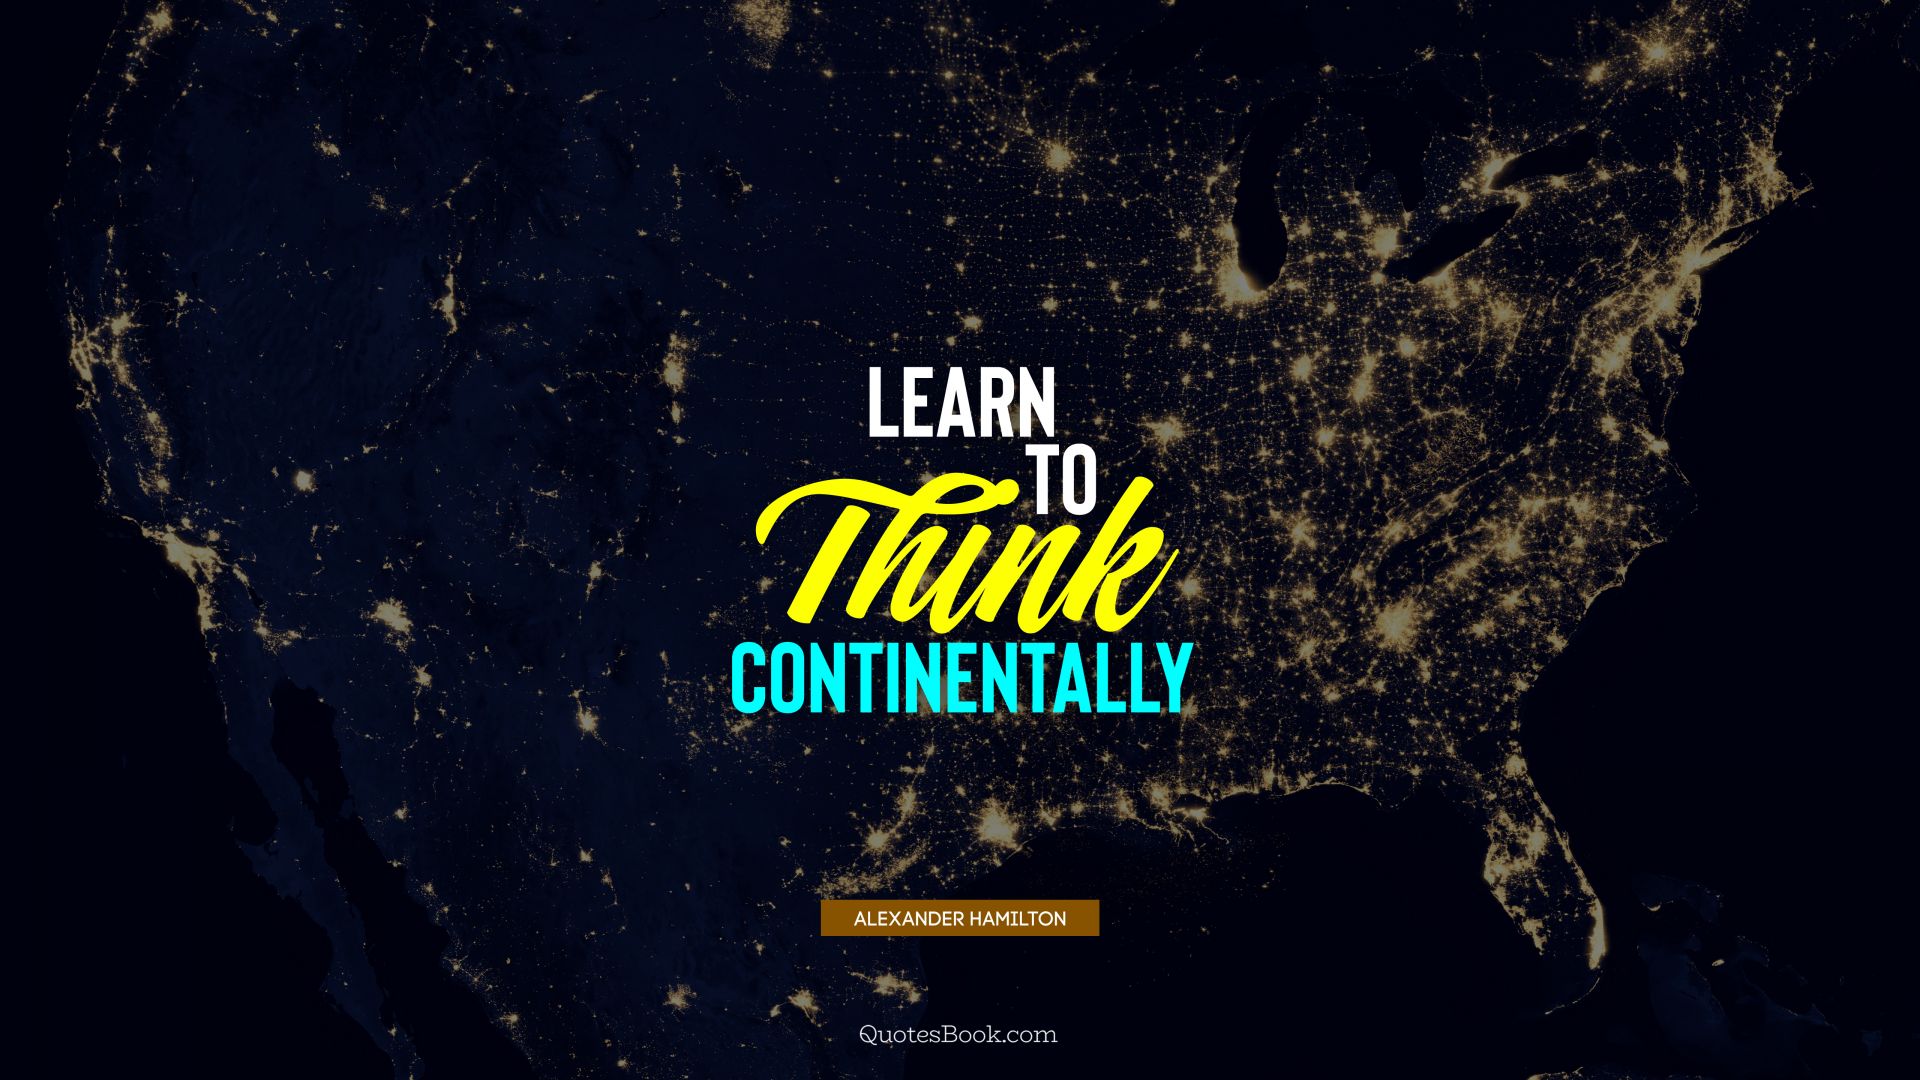 Learn to think continentally. - Quote by Alexander Hamilton